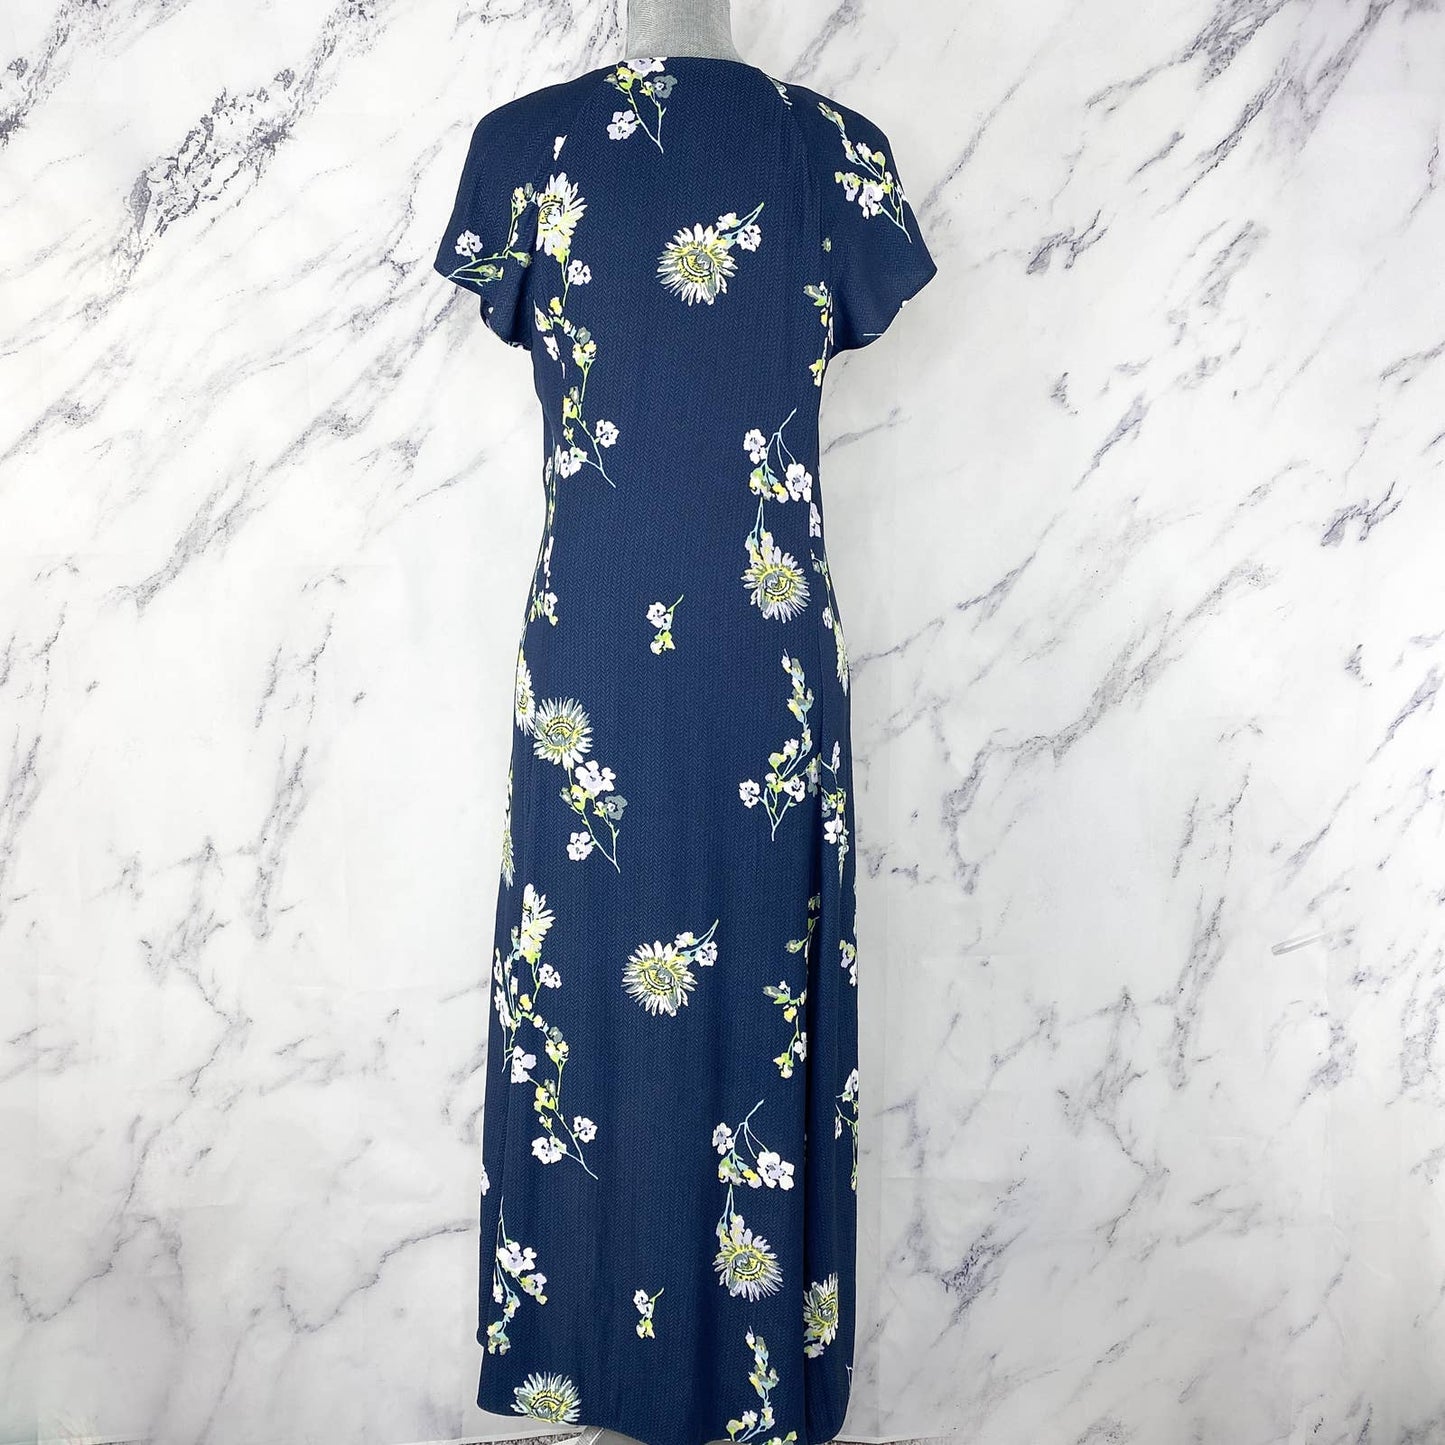 Free People | Lost in You Floral Maxi Dress | Sz S